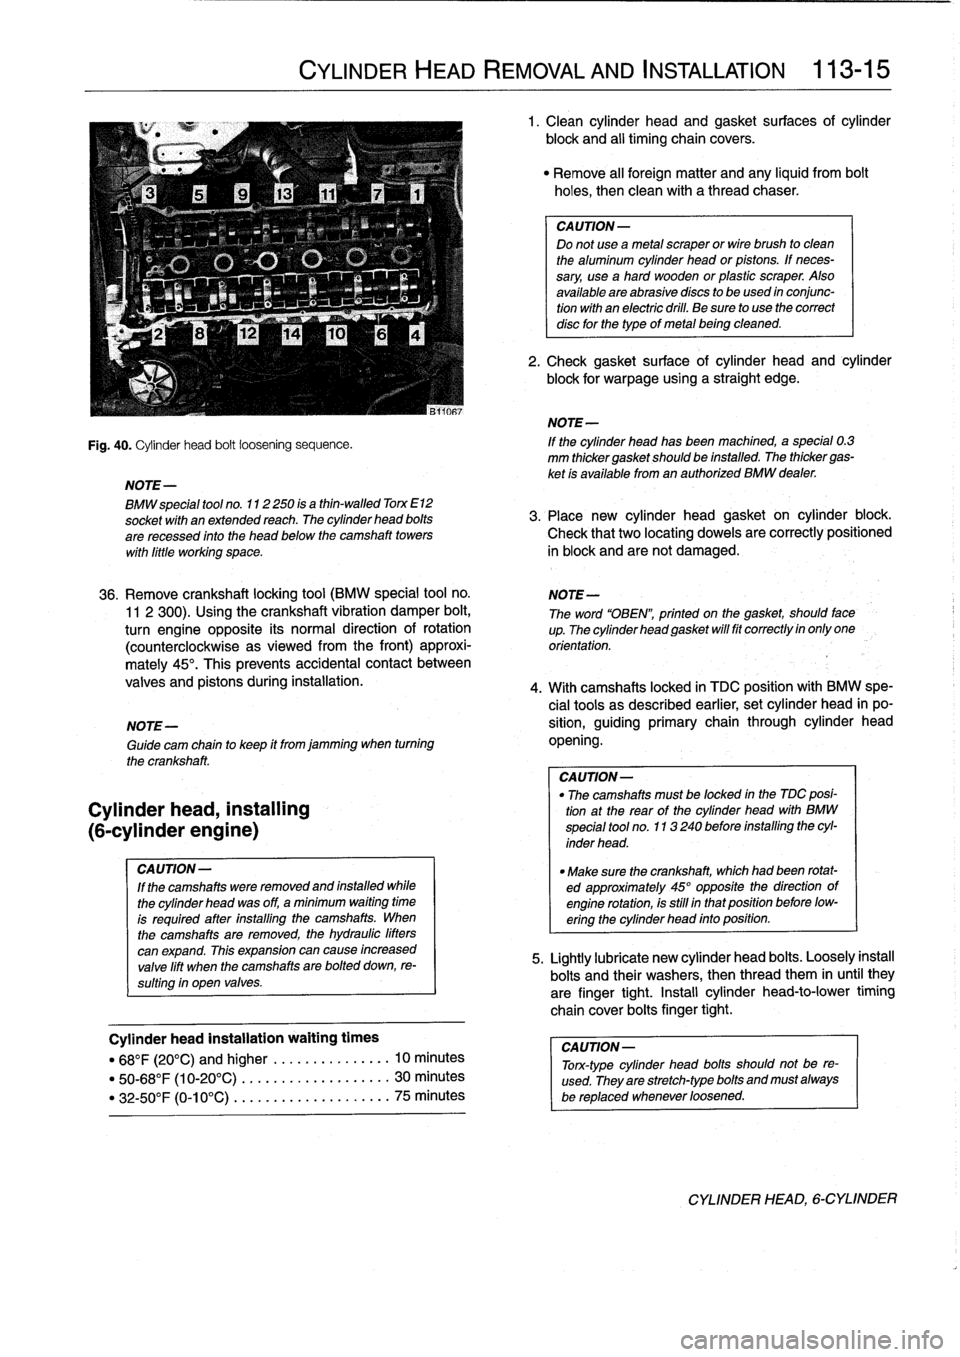 BMW 325i 1996 E36 Workshop Manual 
NOTE-

Cylinder
head,
installing

(6-cylinder
engine)

CAUTION-

If
the
camshafts
were
removed
and
installed
while

the
cylinder
head
was
off,
a
minimum
waiting
time

is
required
after
ínstalling
th